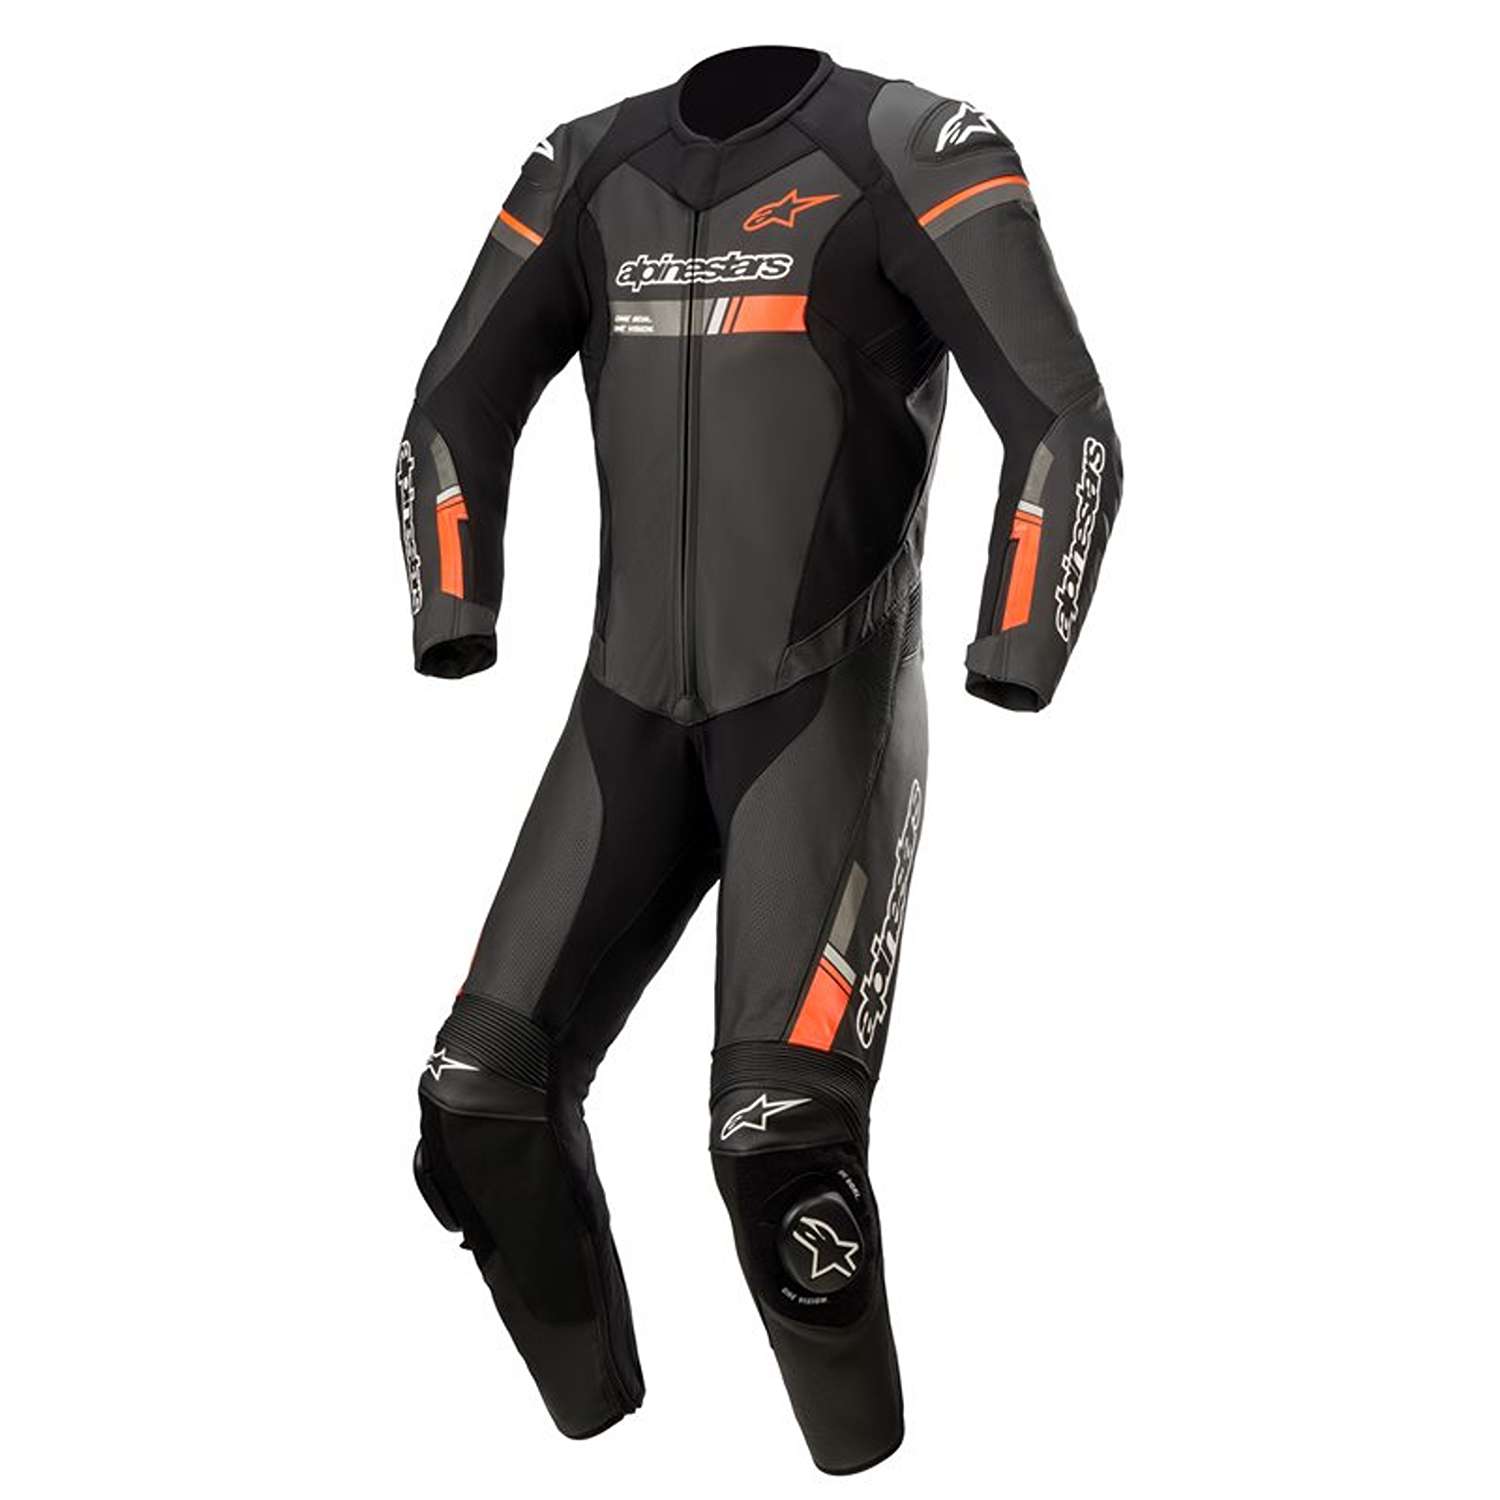 Image of Alpinestars Gp Force Chaser Leather Suit 1 Pc Black Red Fluo Size 48 ID 8059175351471